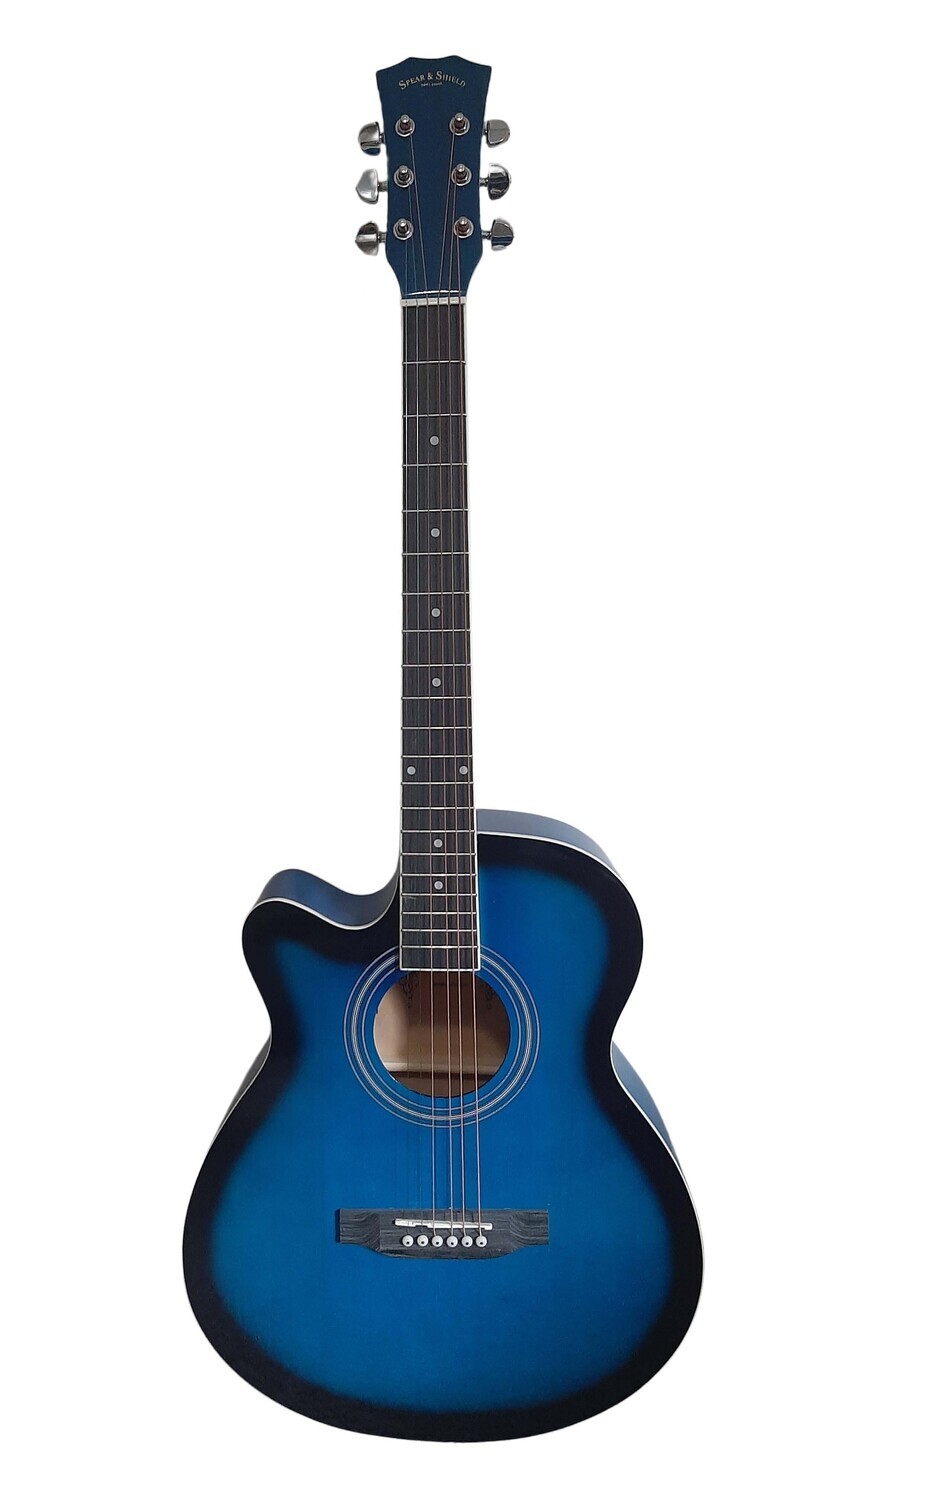 Spear & Shield Left handed Acoustic Guitar for Beginners Adults Students 40-inch Full-size Blue SPS375LF Free Shipping